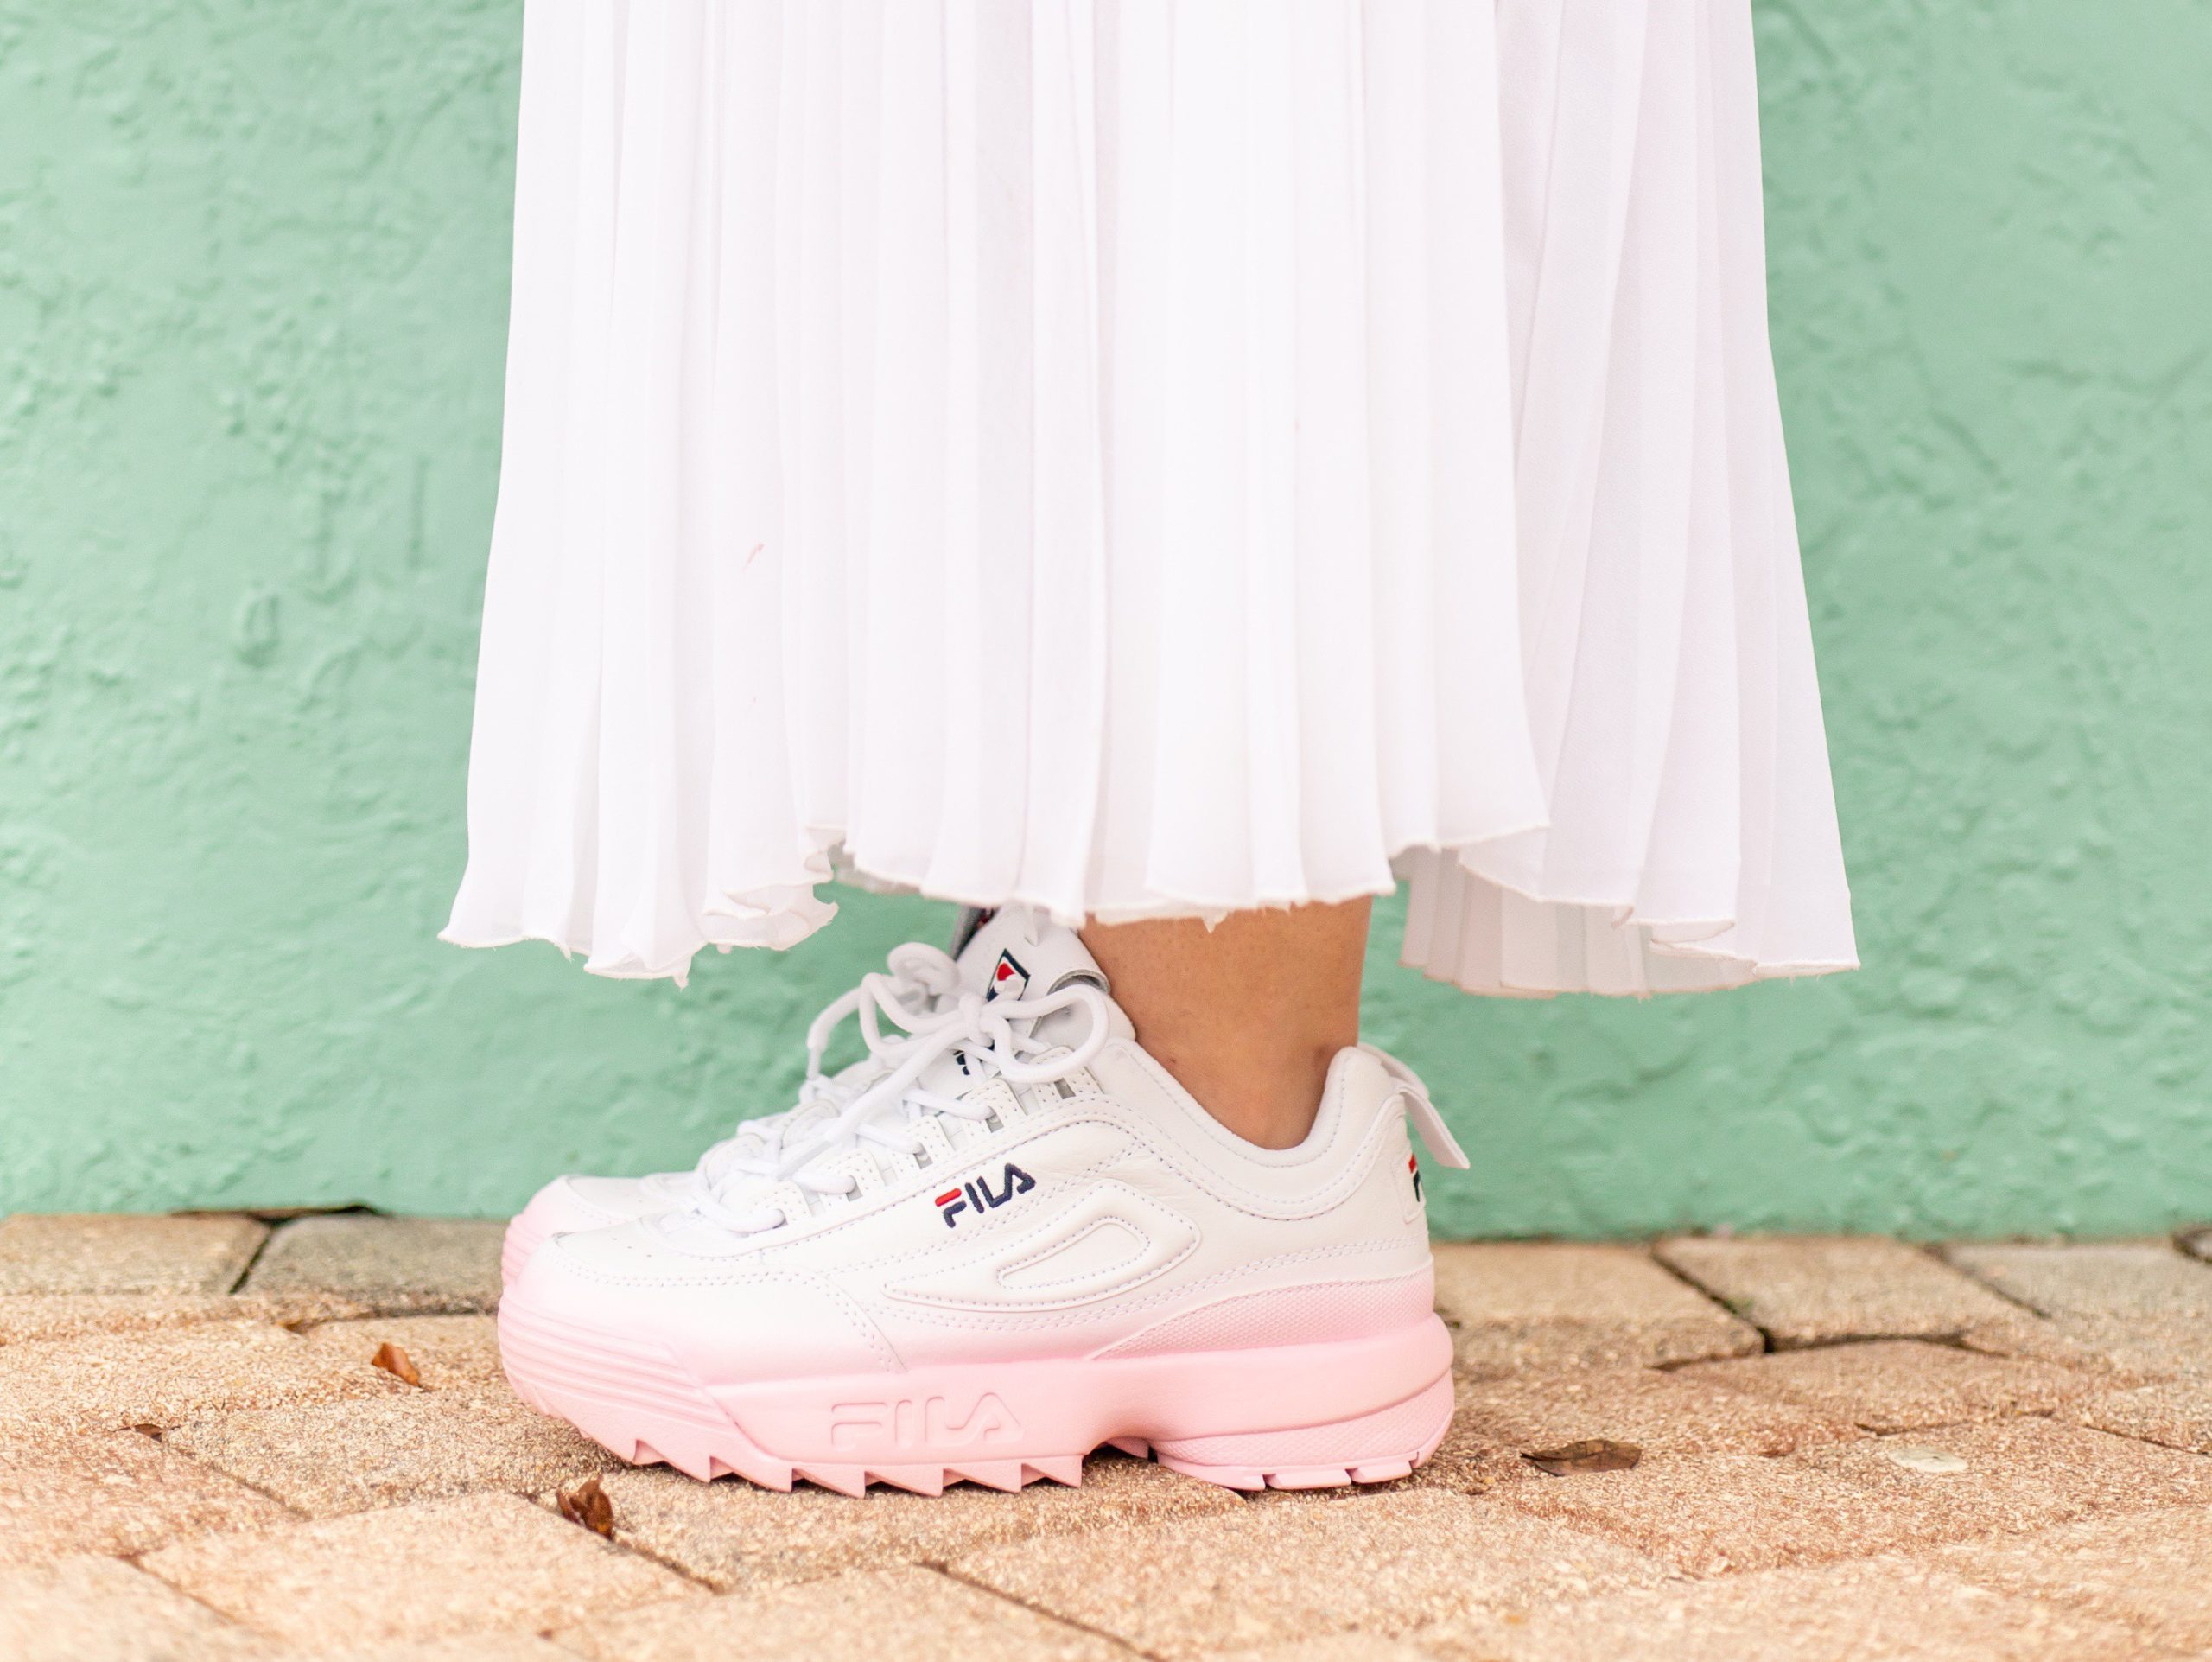 Why I'm White Dressed Obsessed White Zara Dress with with white and pink Fila Sneakers